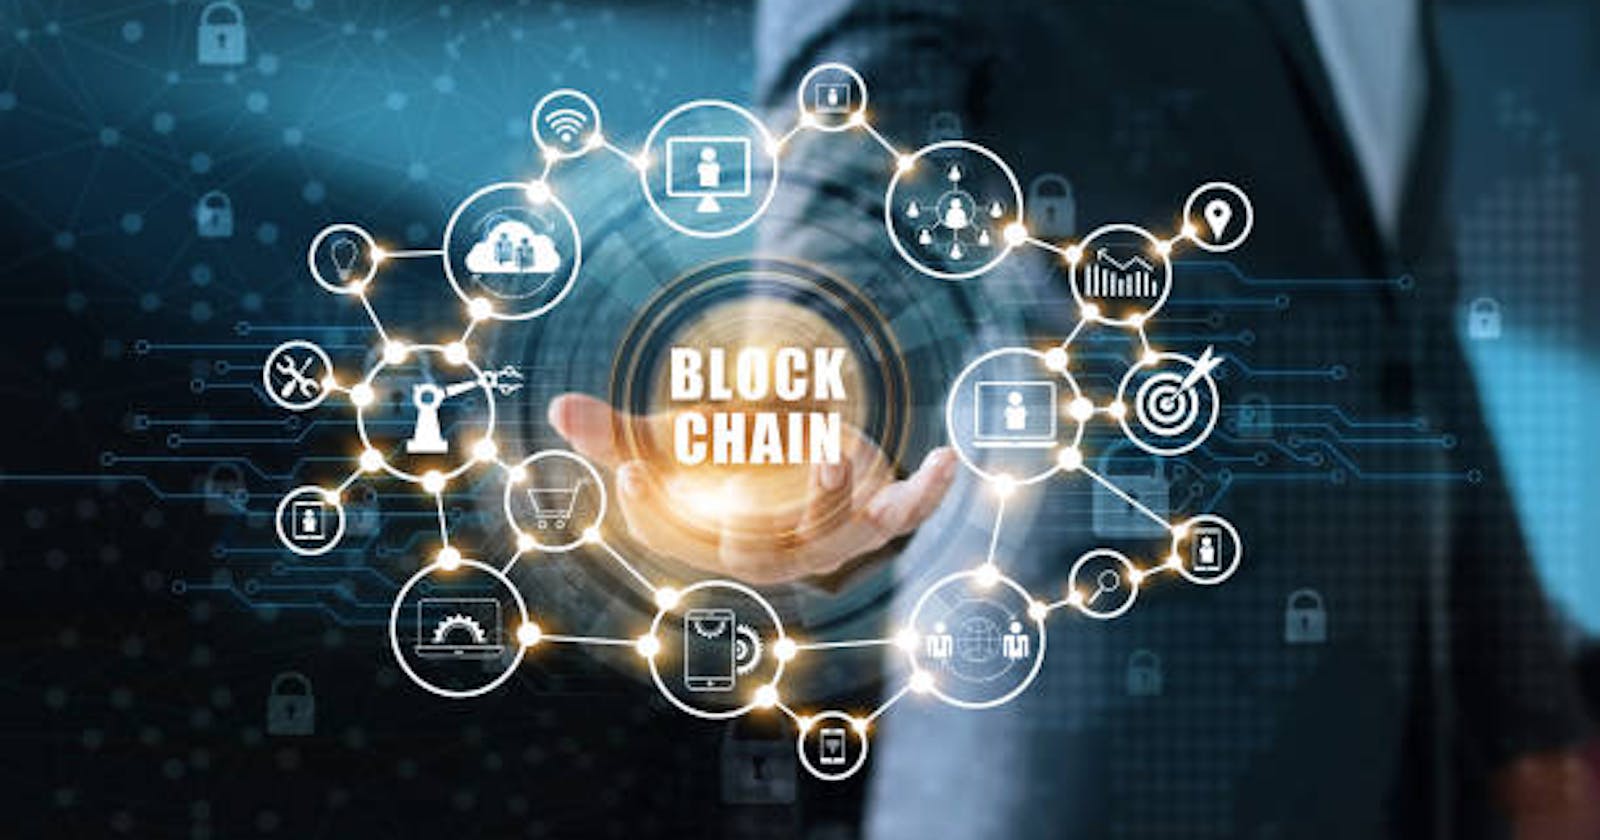 Blockchain Technology and its' potential solutions